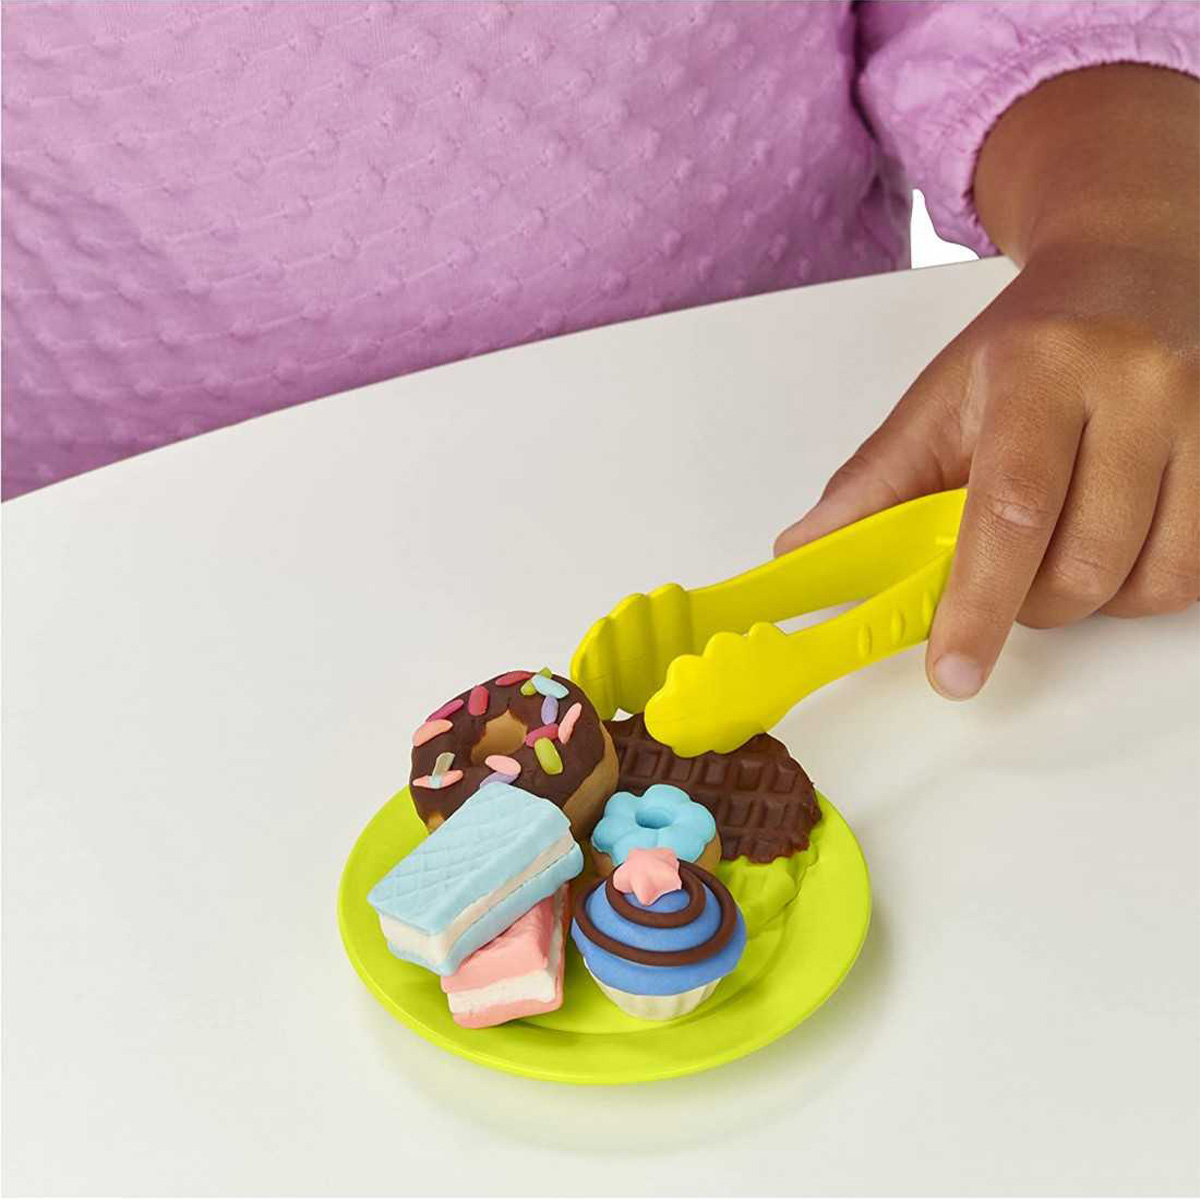 Hasbro-Play-doh Kitchen Creations Super Colourful Cafe Play Food Coffee -   – Online shop of Super chain stores